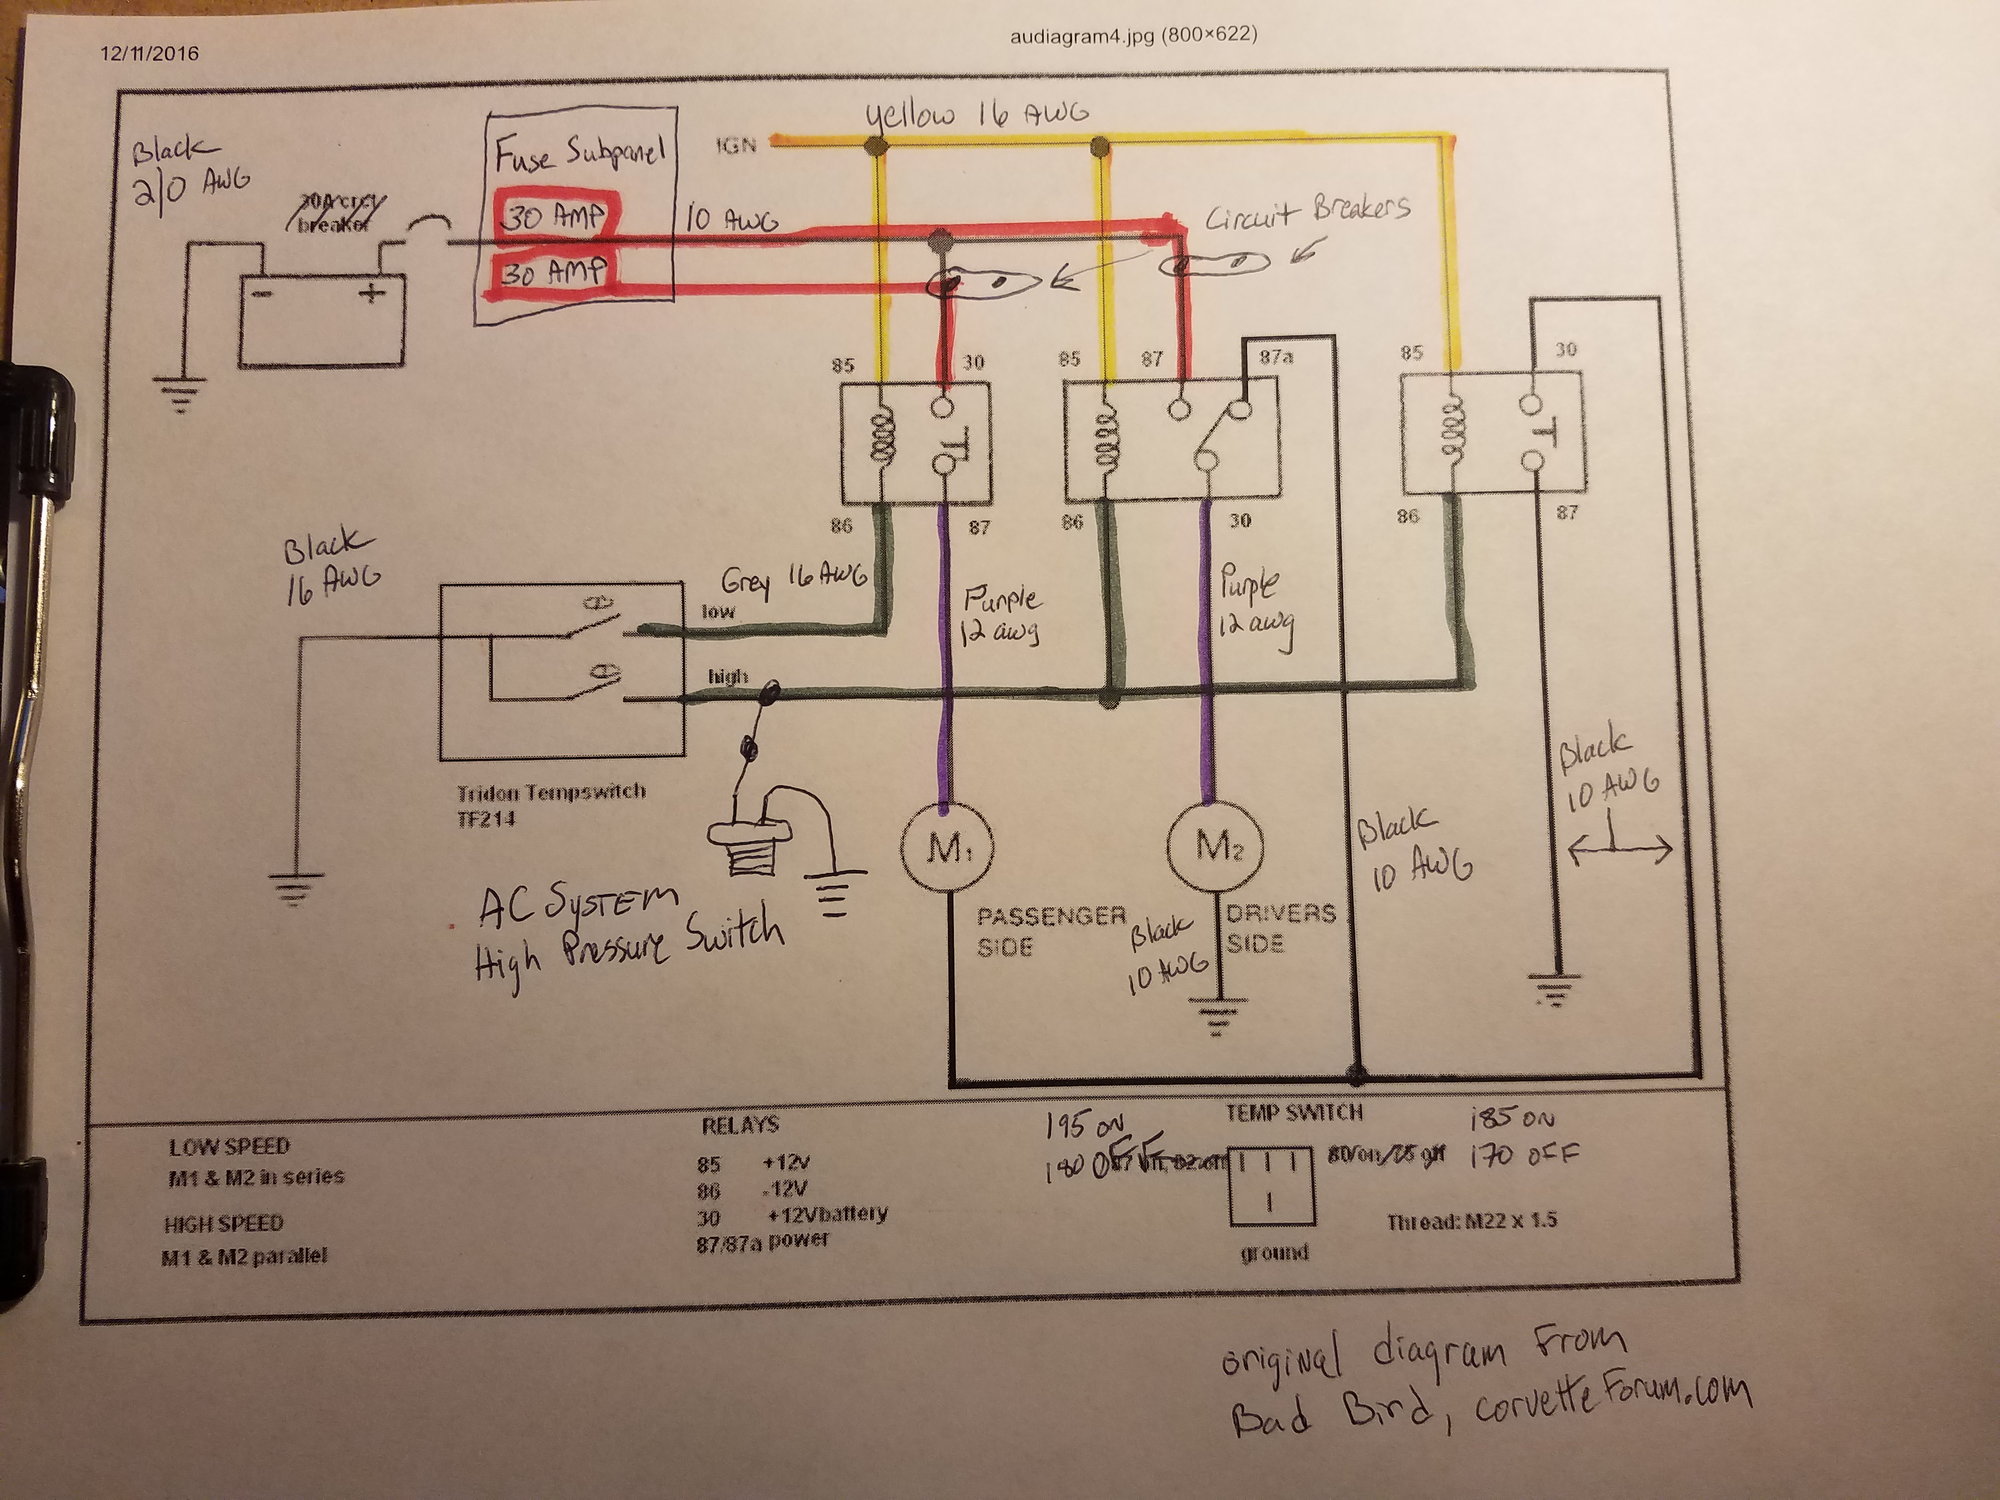 Wiring Schematic request for Dual Fan upgrade - Page 3 ...